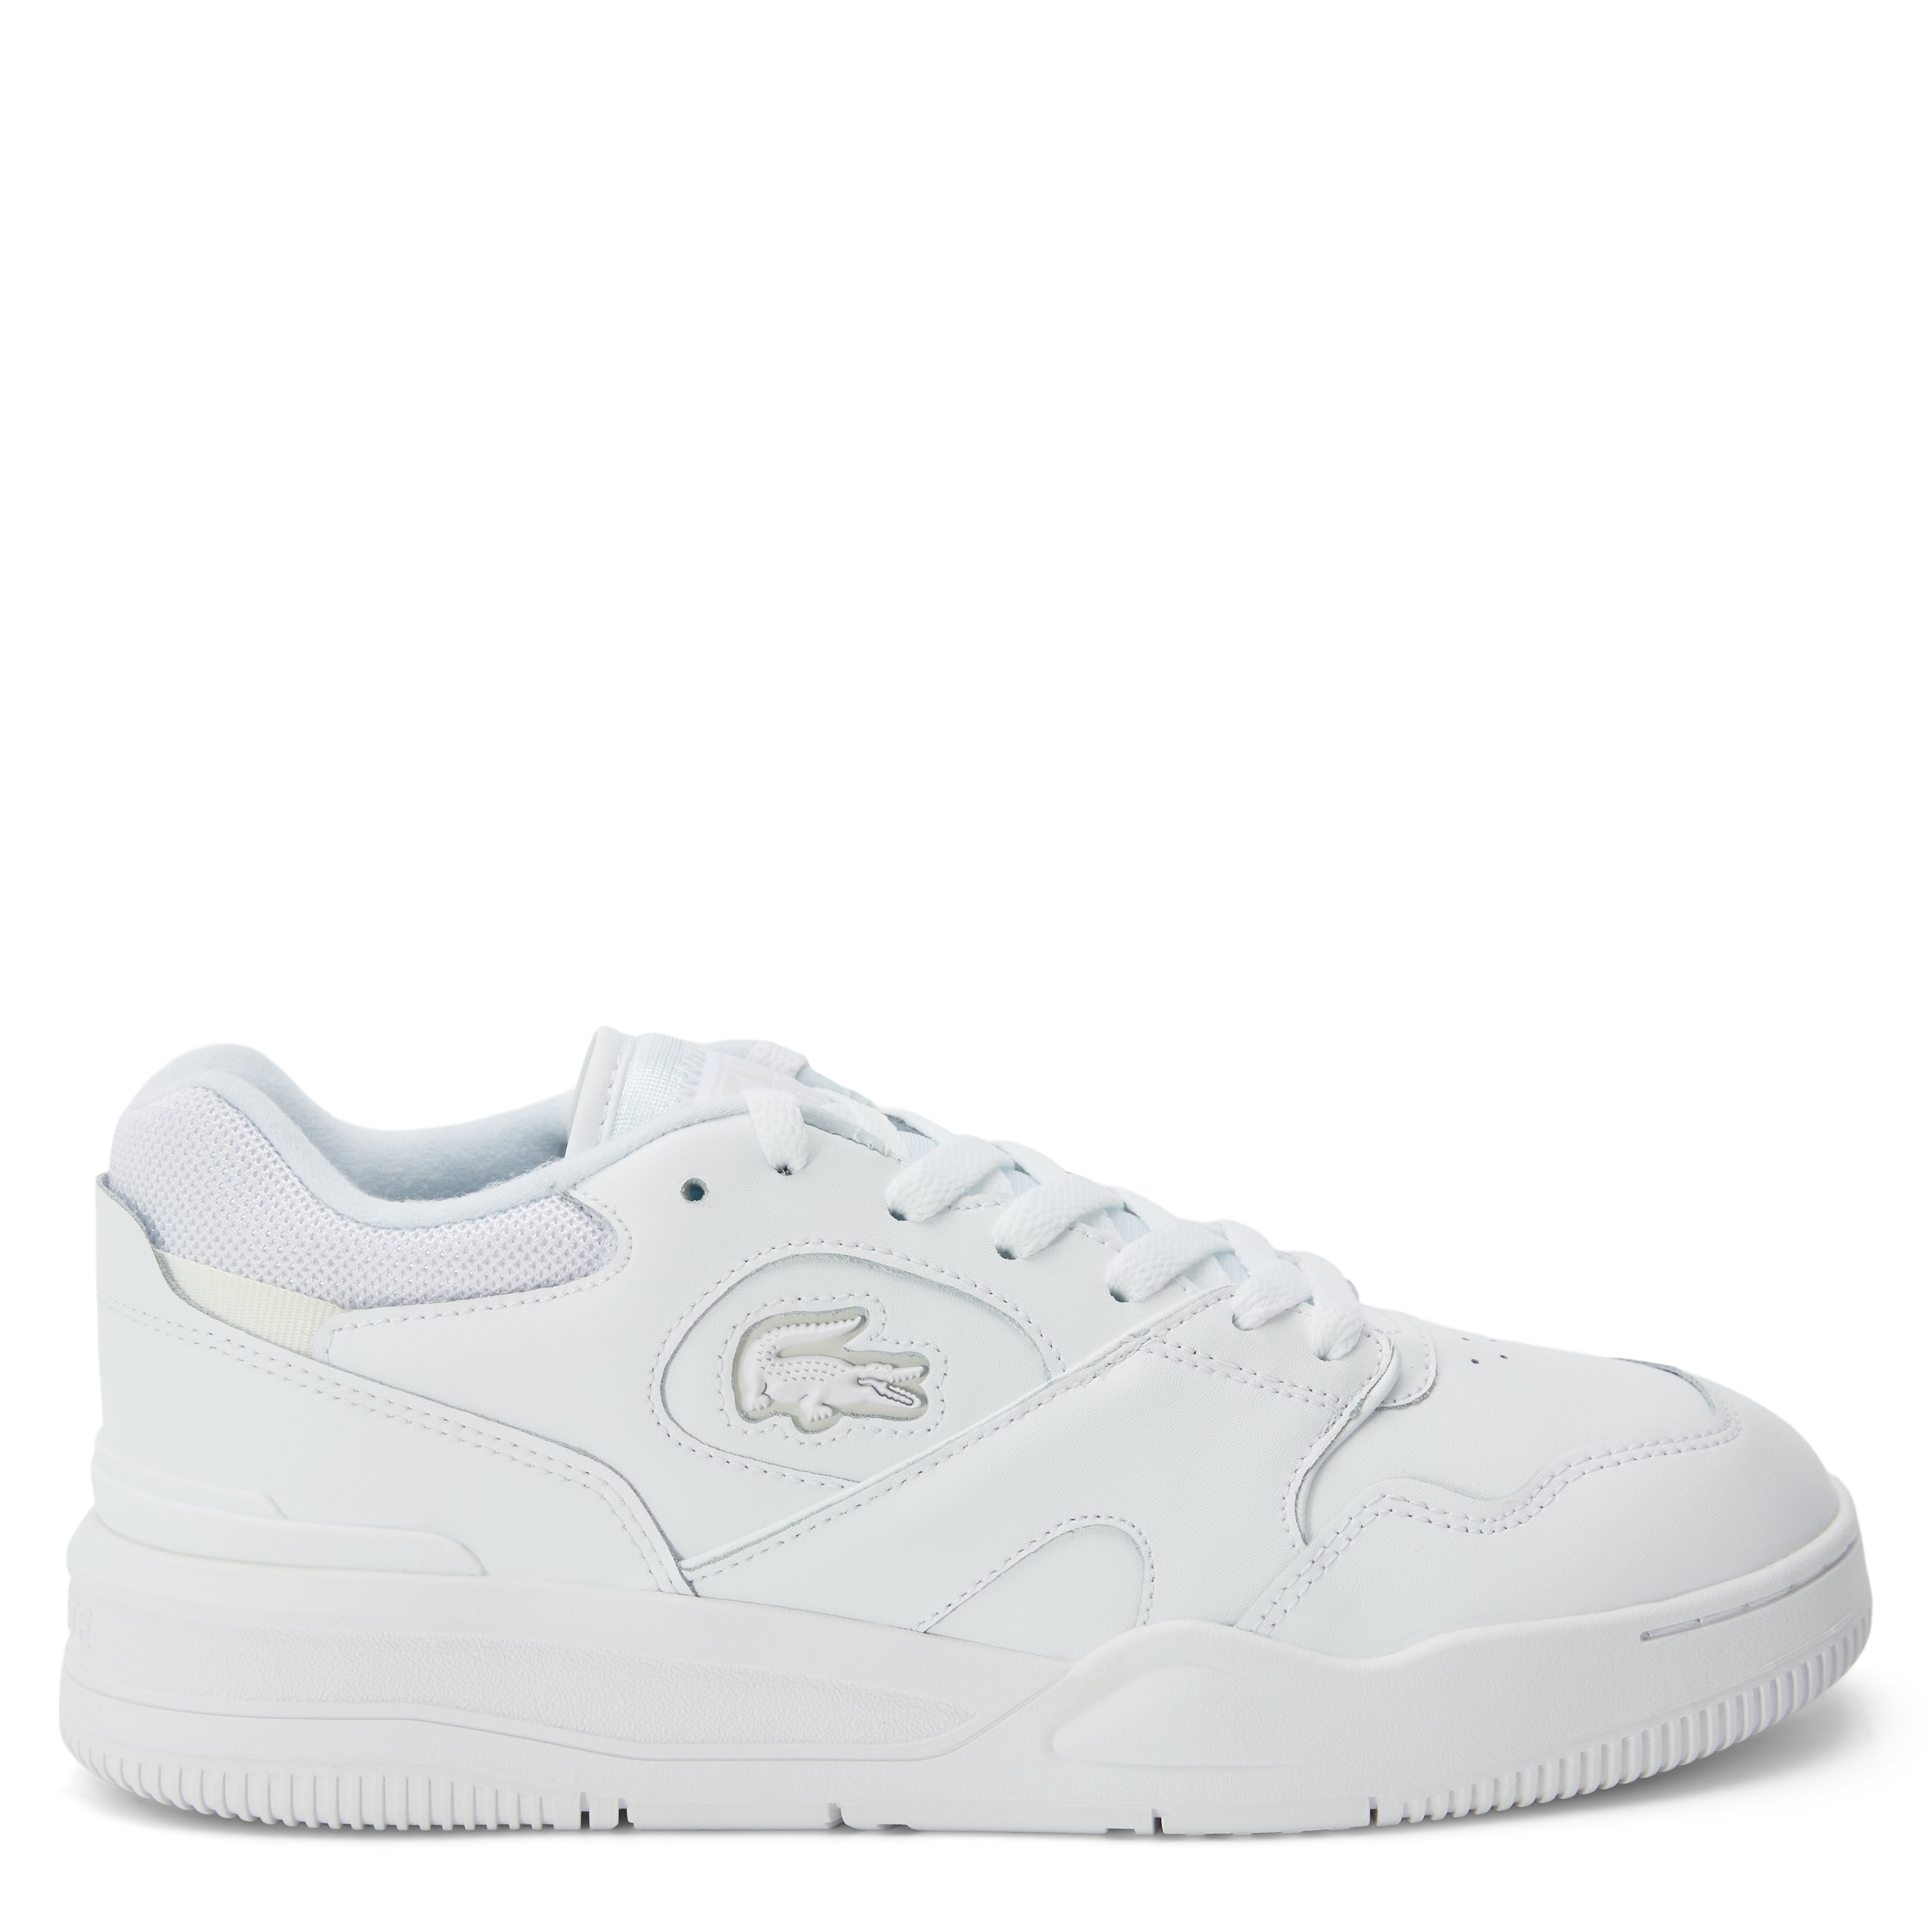 Lacoste Shoes LINESHOT 21G White